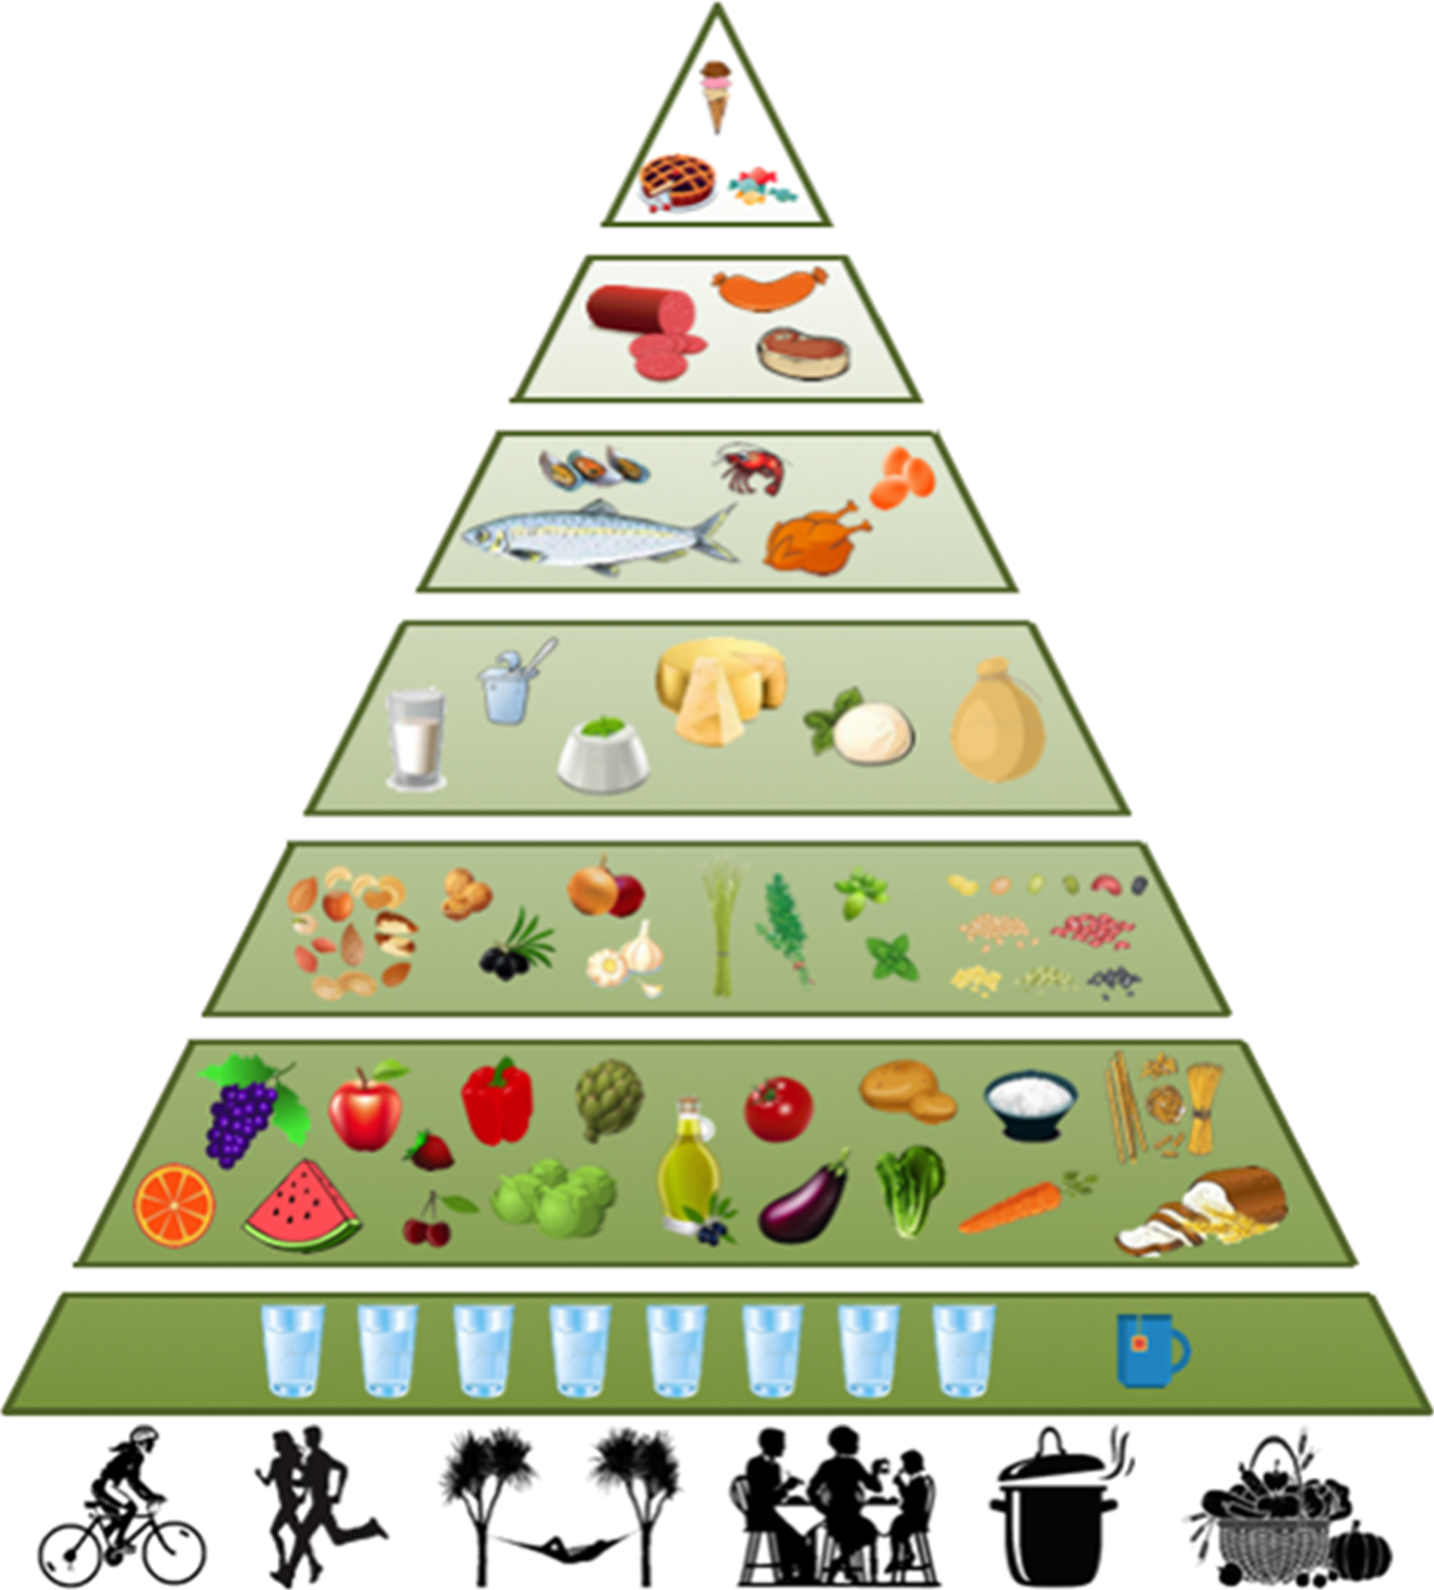 The Mediterranean Diet Pyramid. Schematic representation of the rules expressed by the Mediterranean Diet Pyramid described by Bach-Faig et al. in 2011 [41].